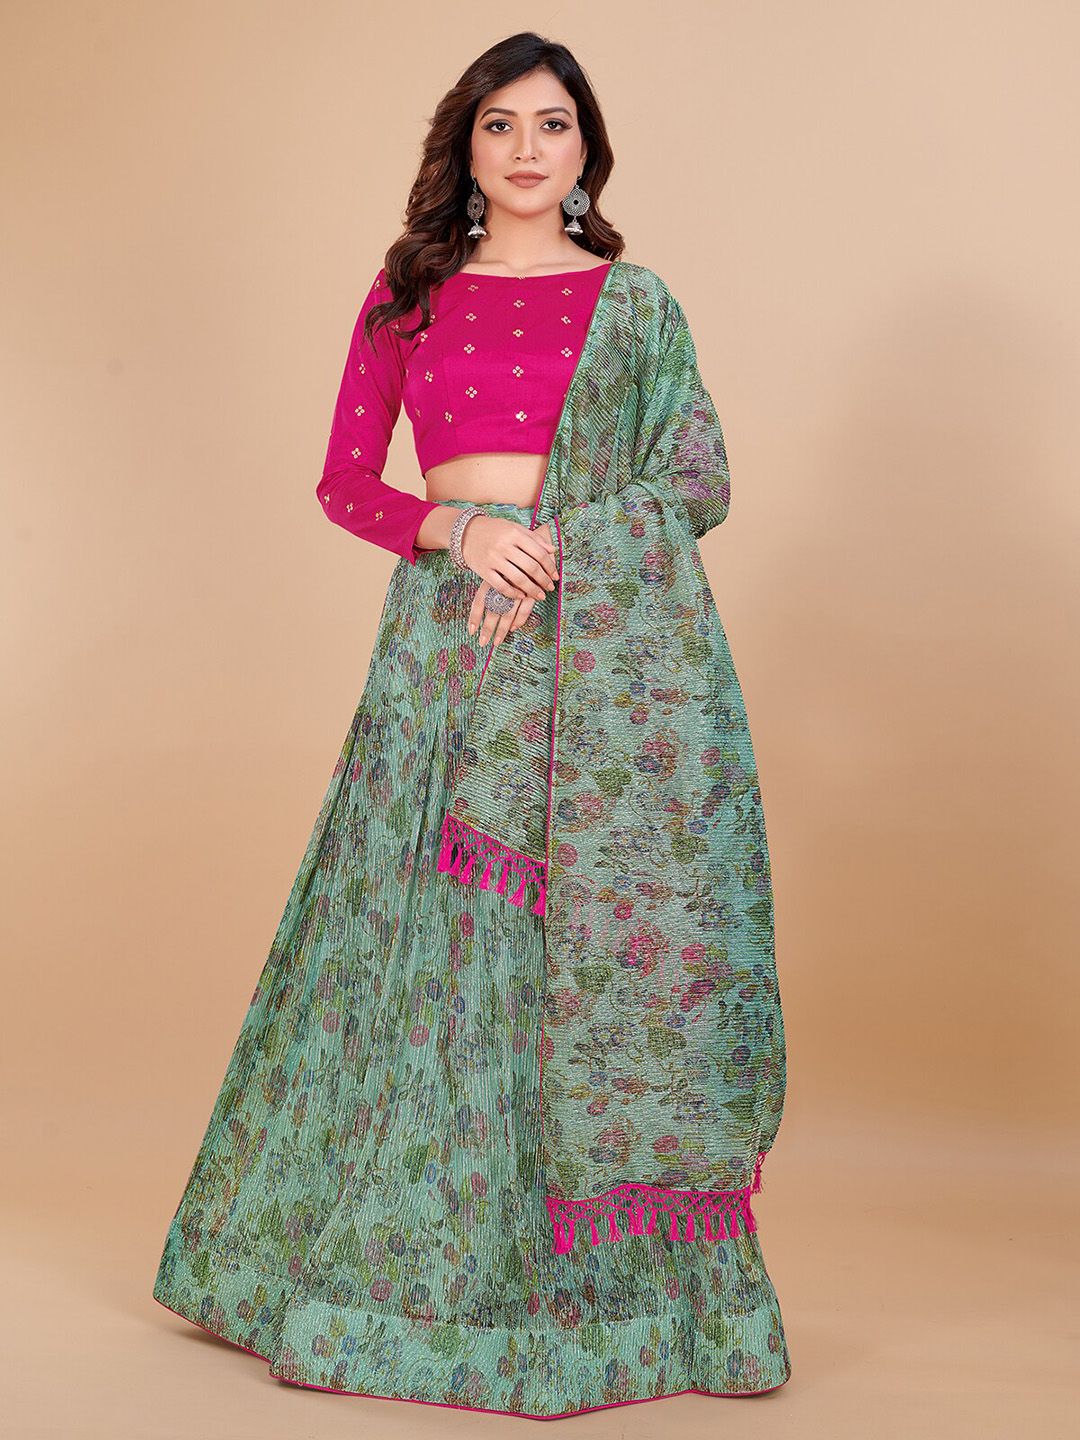 KALINI Floral Printed Embellished Ready to Wear Lehenga & Unstitched Blouse With Dupatta Price in India